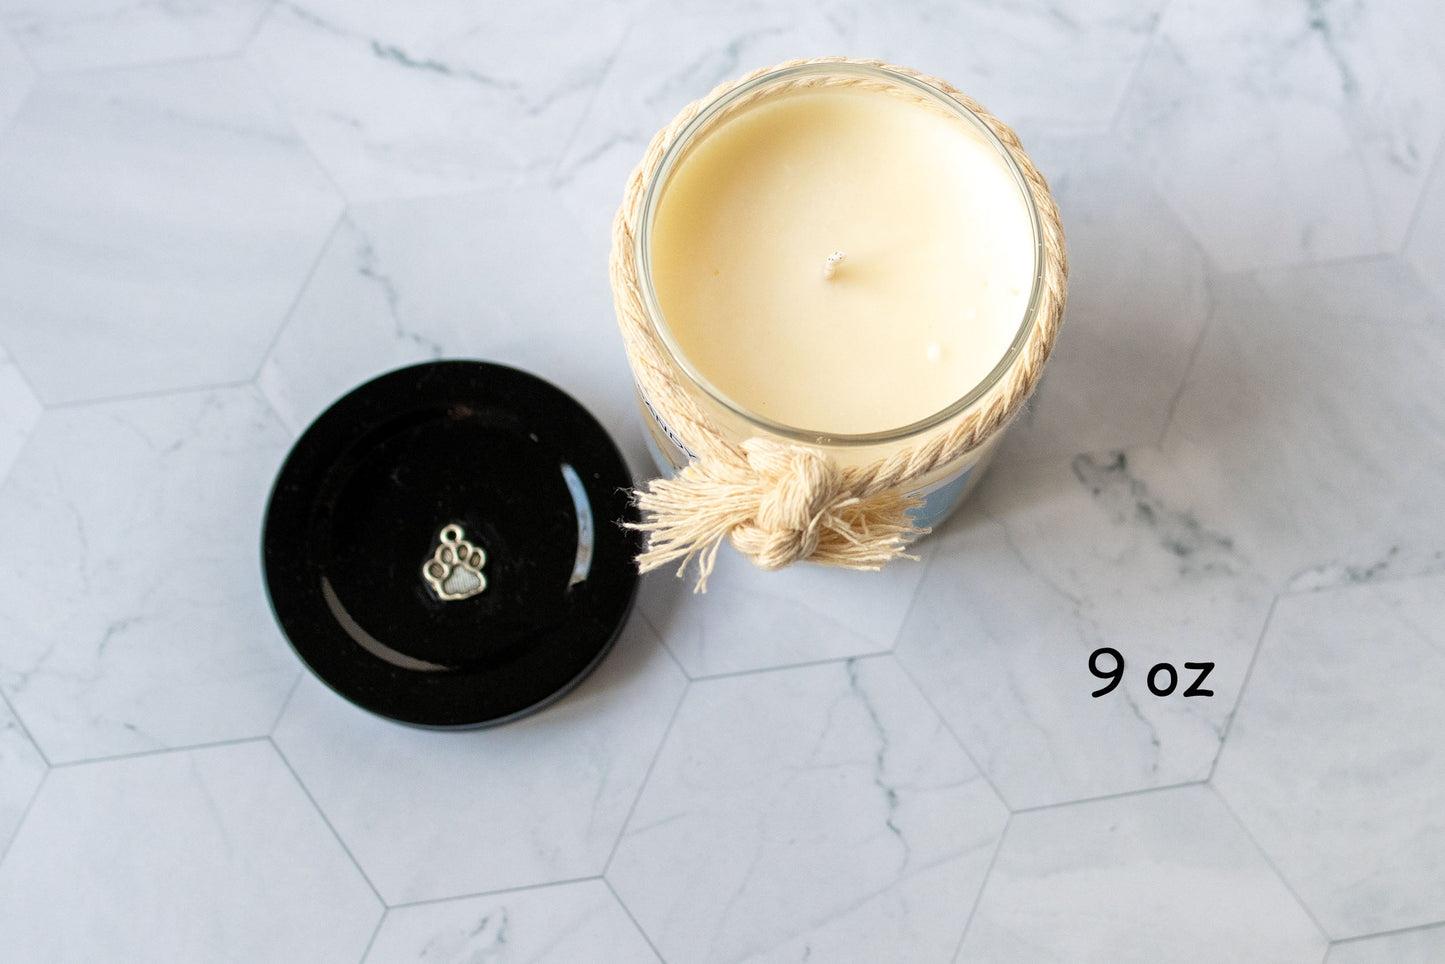 Dog Lover Soy Wax Candle - "Who rescued who?" - Fundraiser